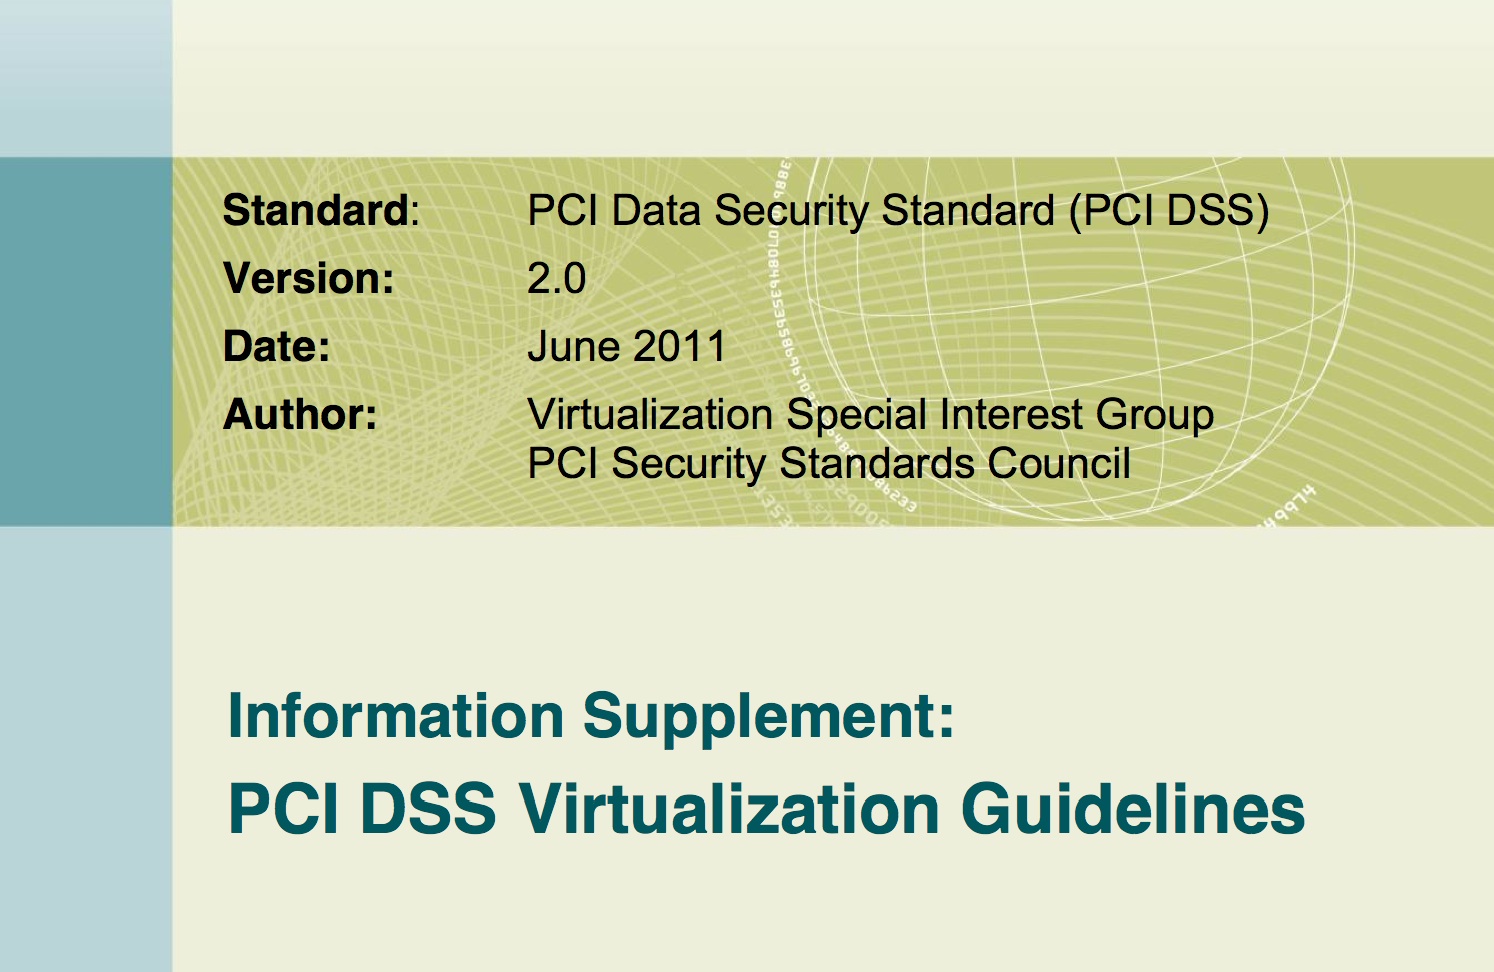 PCI DSS Virtualization Guidelines 2.0